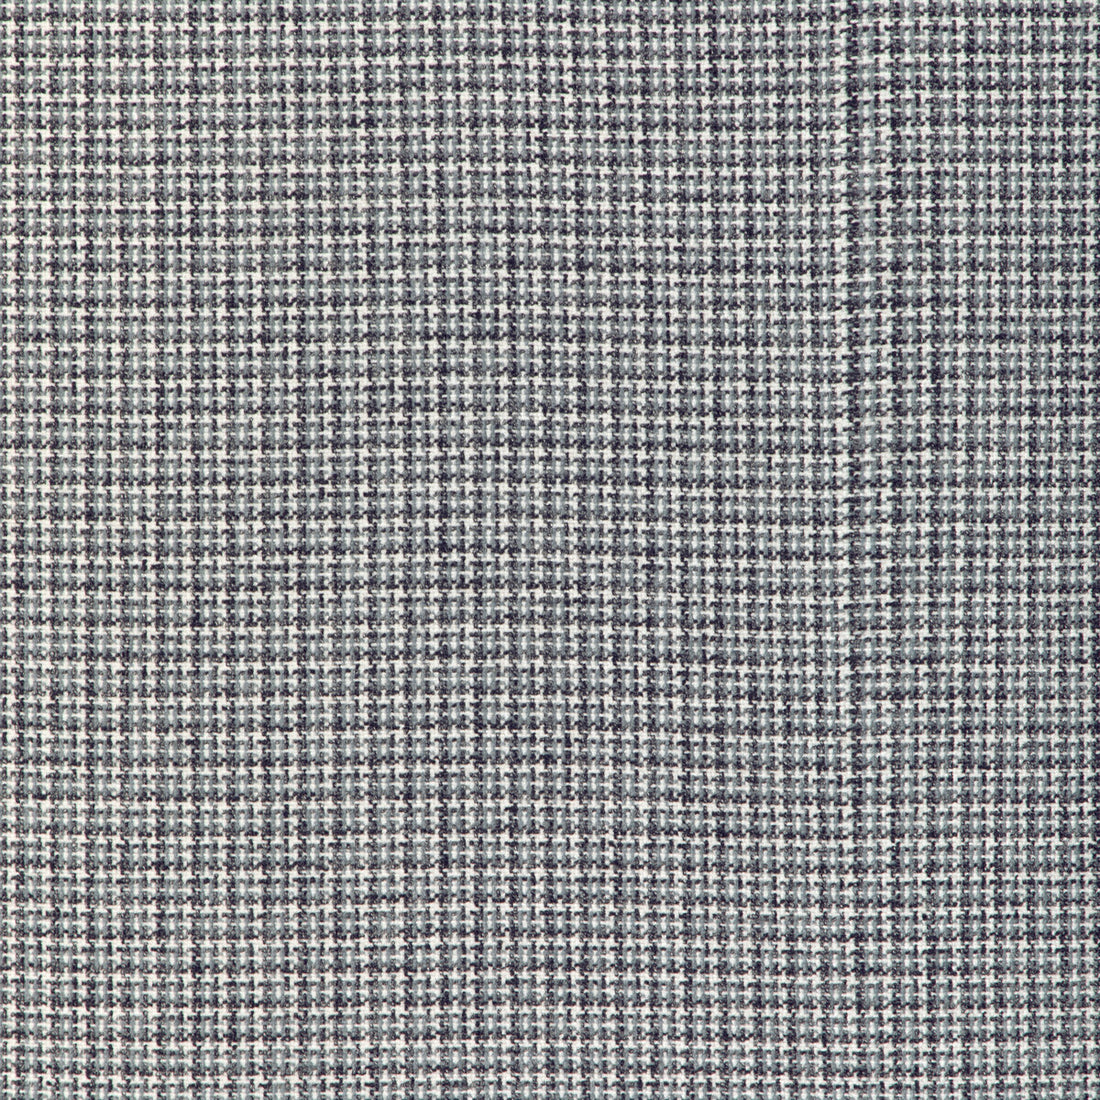 Aria Check fabric in charcoal color - pattern 36950.21.0 - by Kravet Basics in the Mid-Century Modern collection